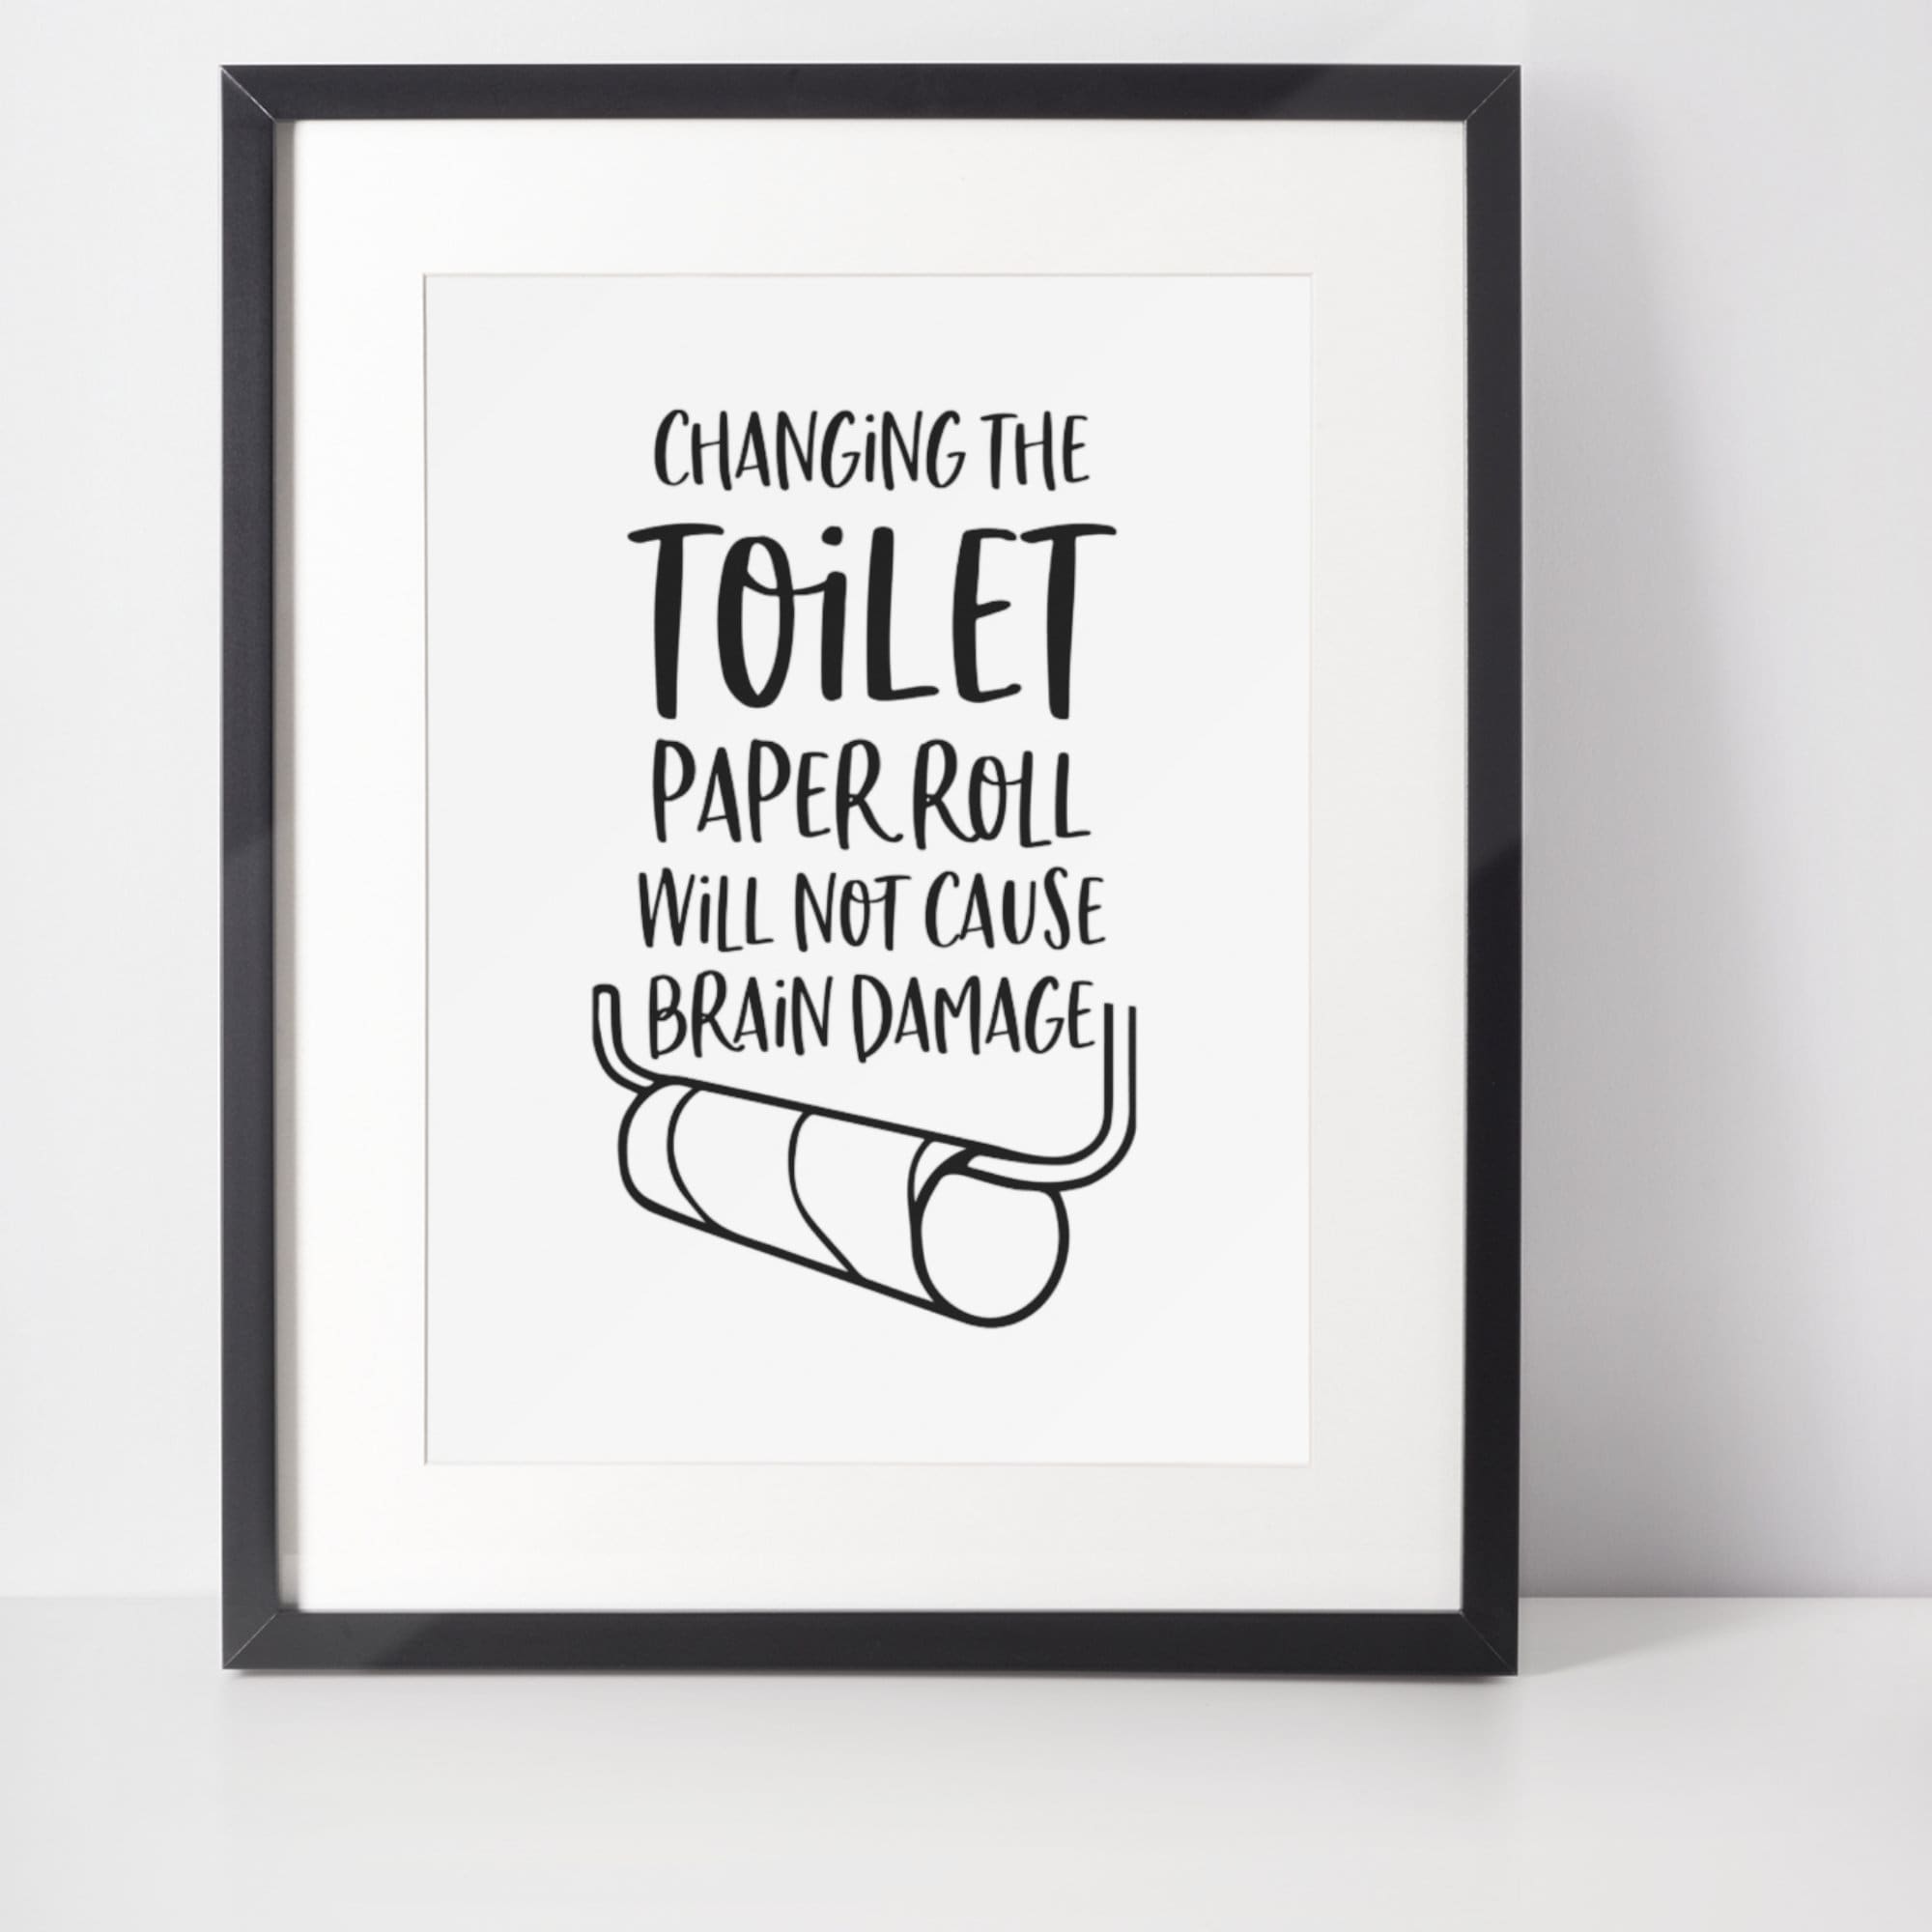 Changing The Toilet Paper Roll,Bathroom Wall Decor,Printable Art,Bathroom Printable,Bathroom Print,Instant Download,Funny Bathroom Sign,Art